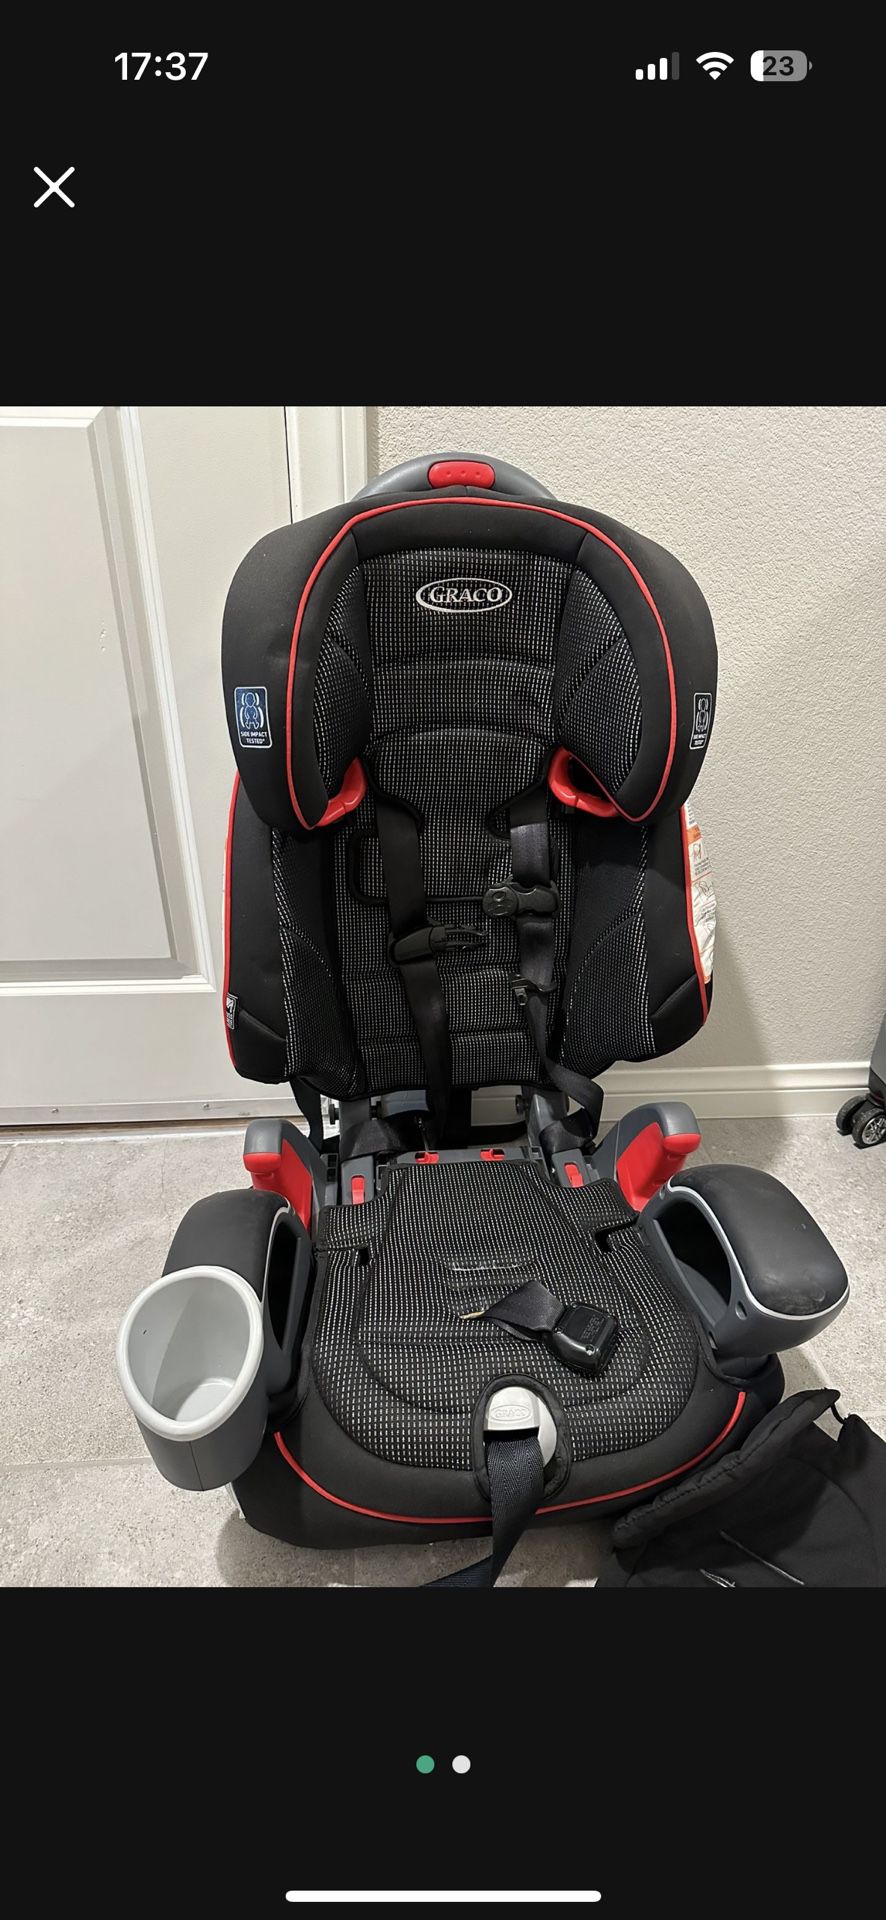 Graco Car Seat In Great Condition , Make Me An Offer Northwest Of Vegas 